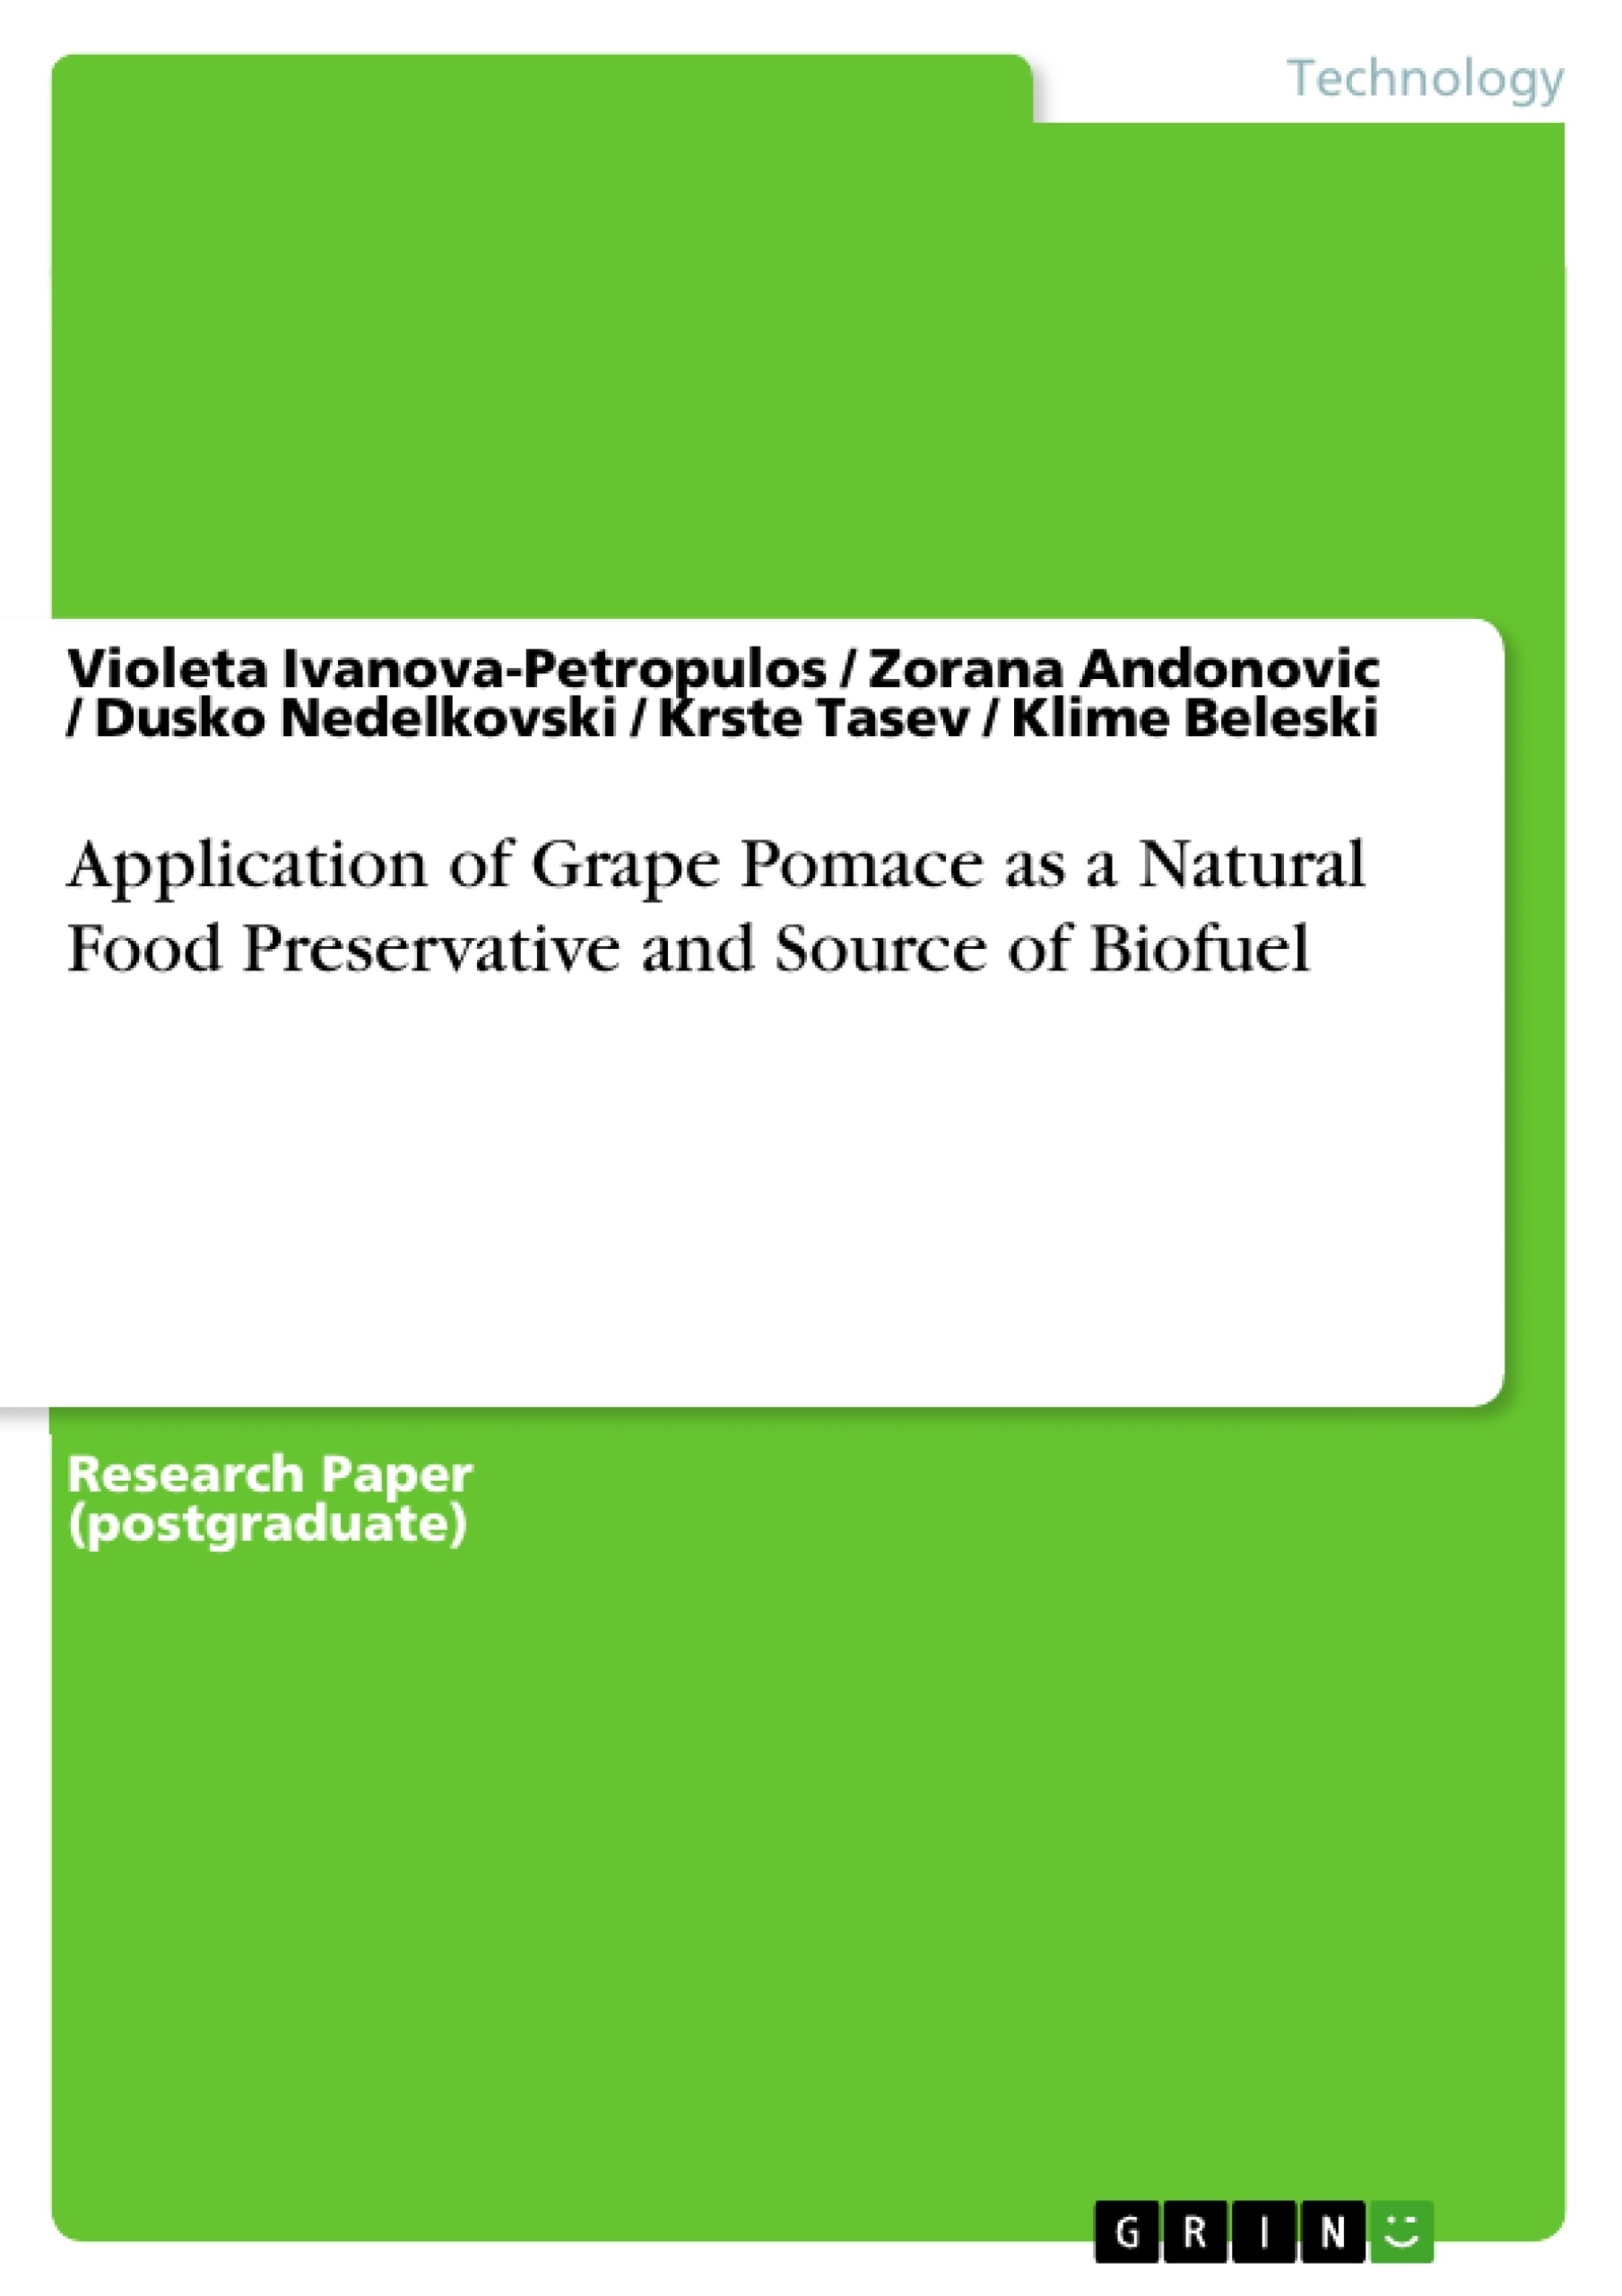 Title: Application of Grape Pomace as a Natural Food Preservative and Source of Biofuel